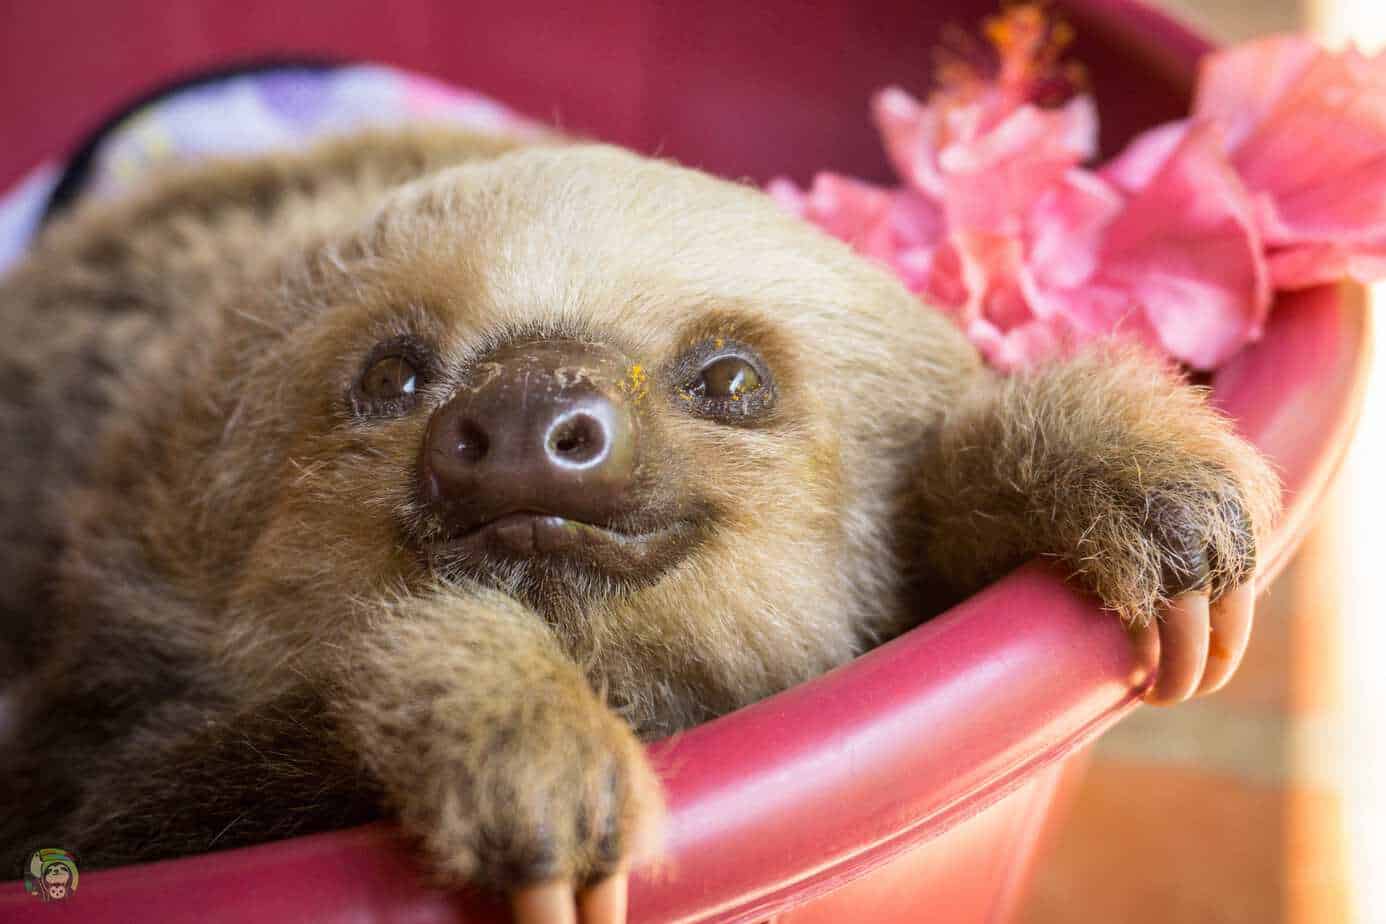 Anise, a two-fingered sloth at Toucan Rescue Ranch in Costa Rica.